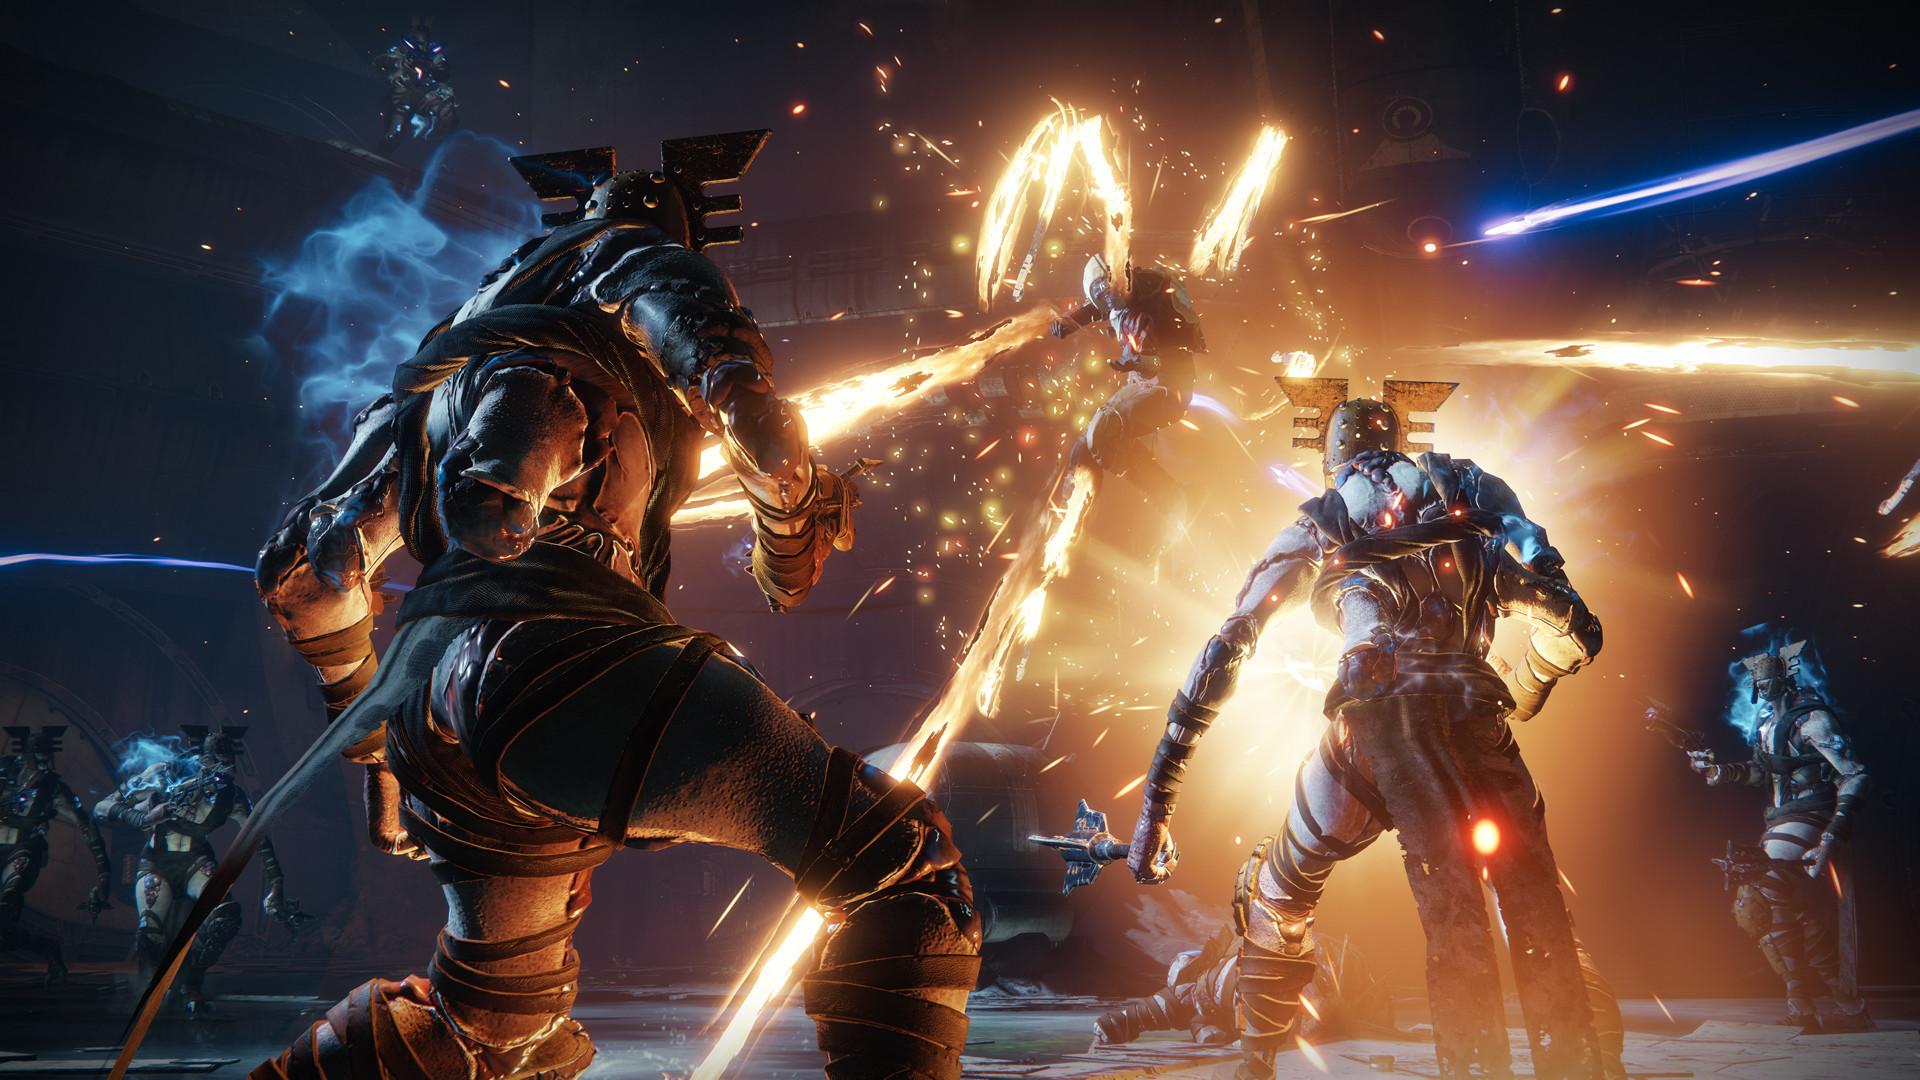 It's looking like Destiny 2 could be bracing for another new dawn in Season 11.